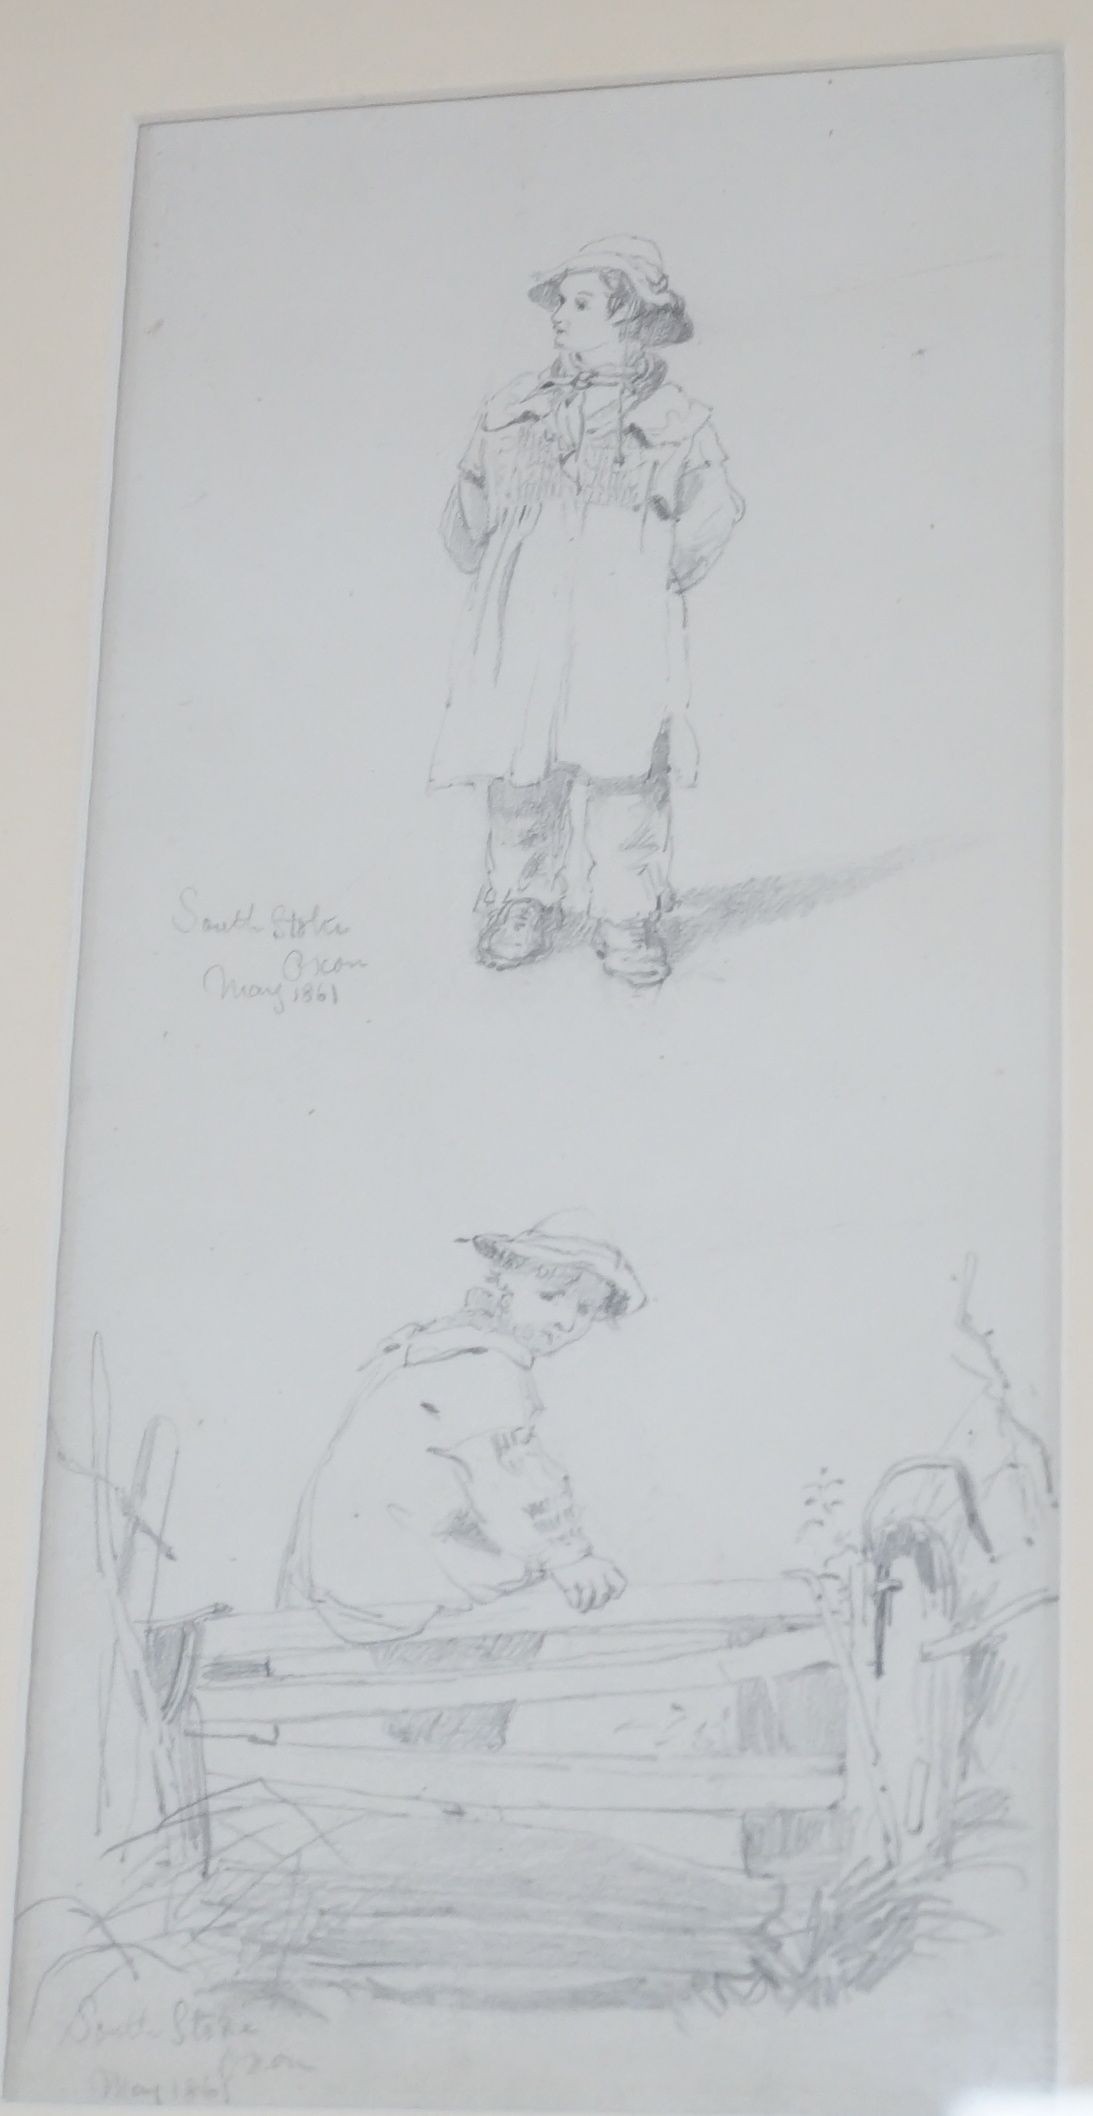 John Henry Mole (1814-1886), Child on a stile and study of another child, inscribed ‘South Stoke, - Image 2 of 3